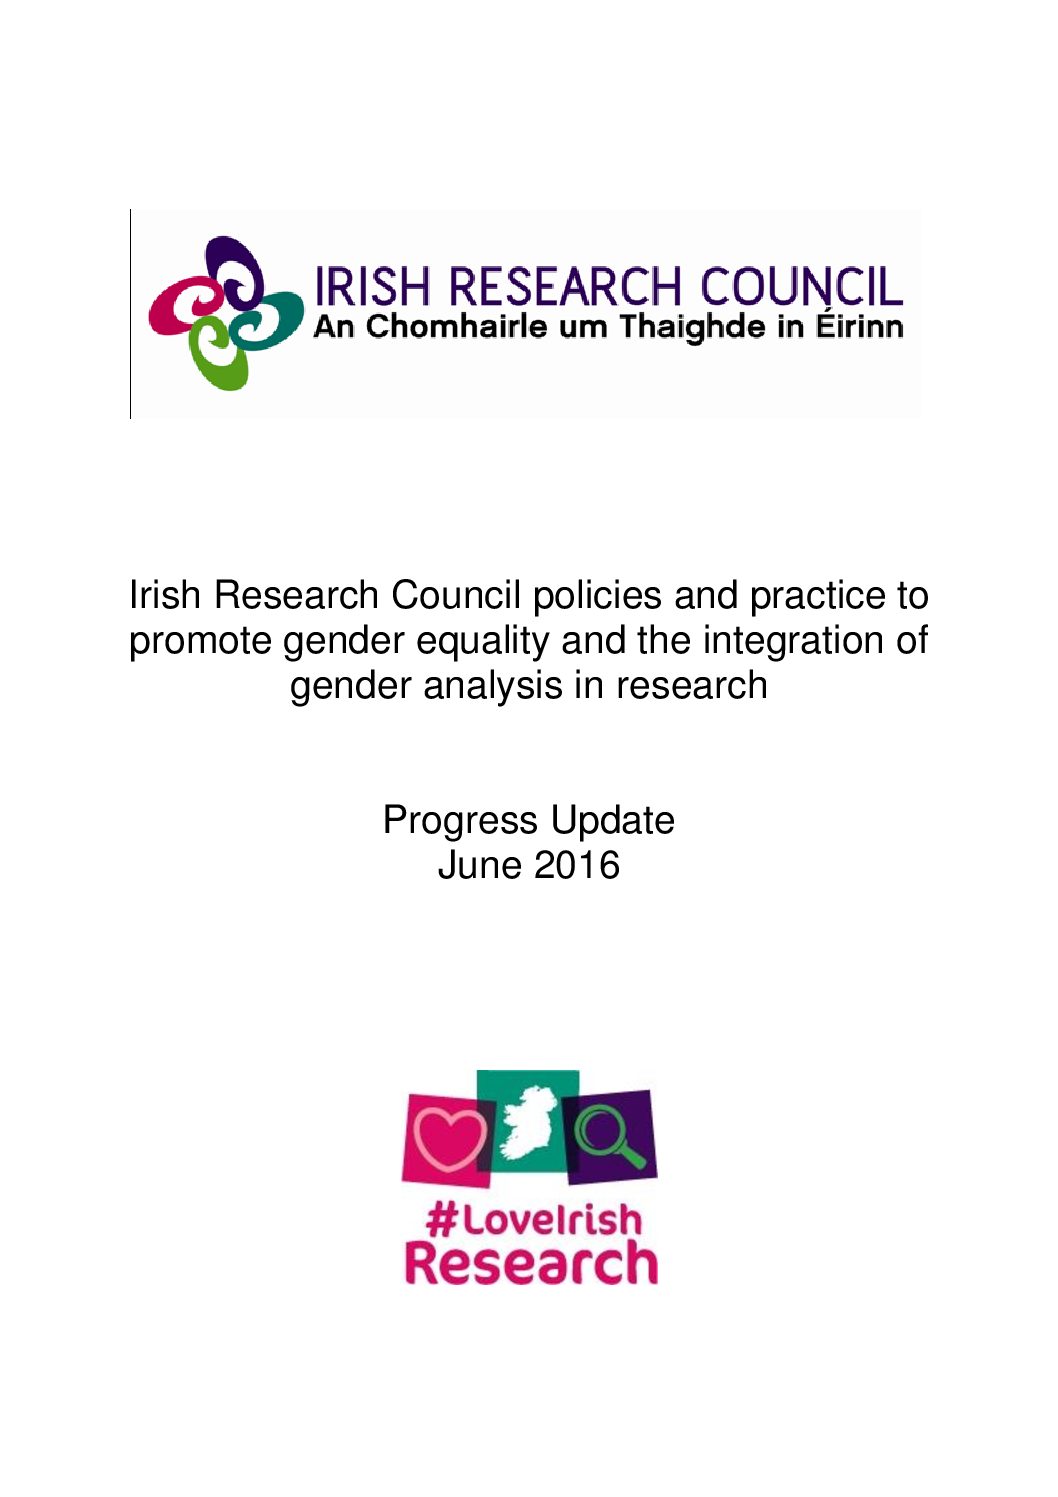 Promoting Gender Equality and the Integration of Gender Analysis in Research